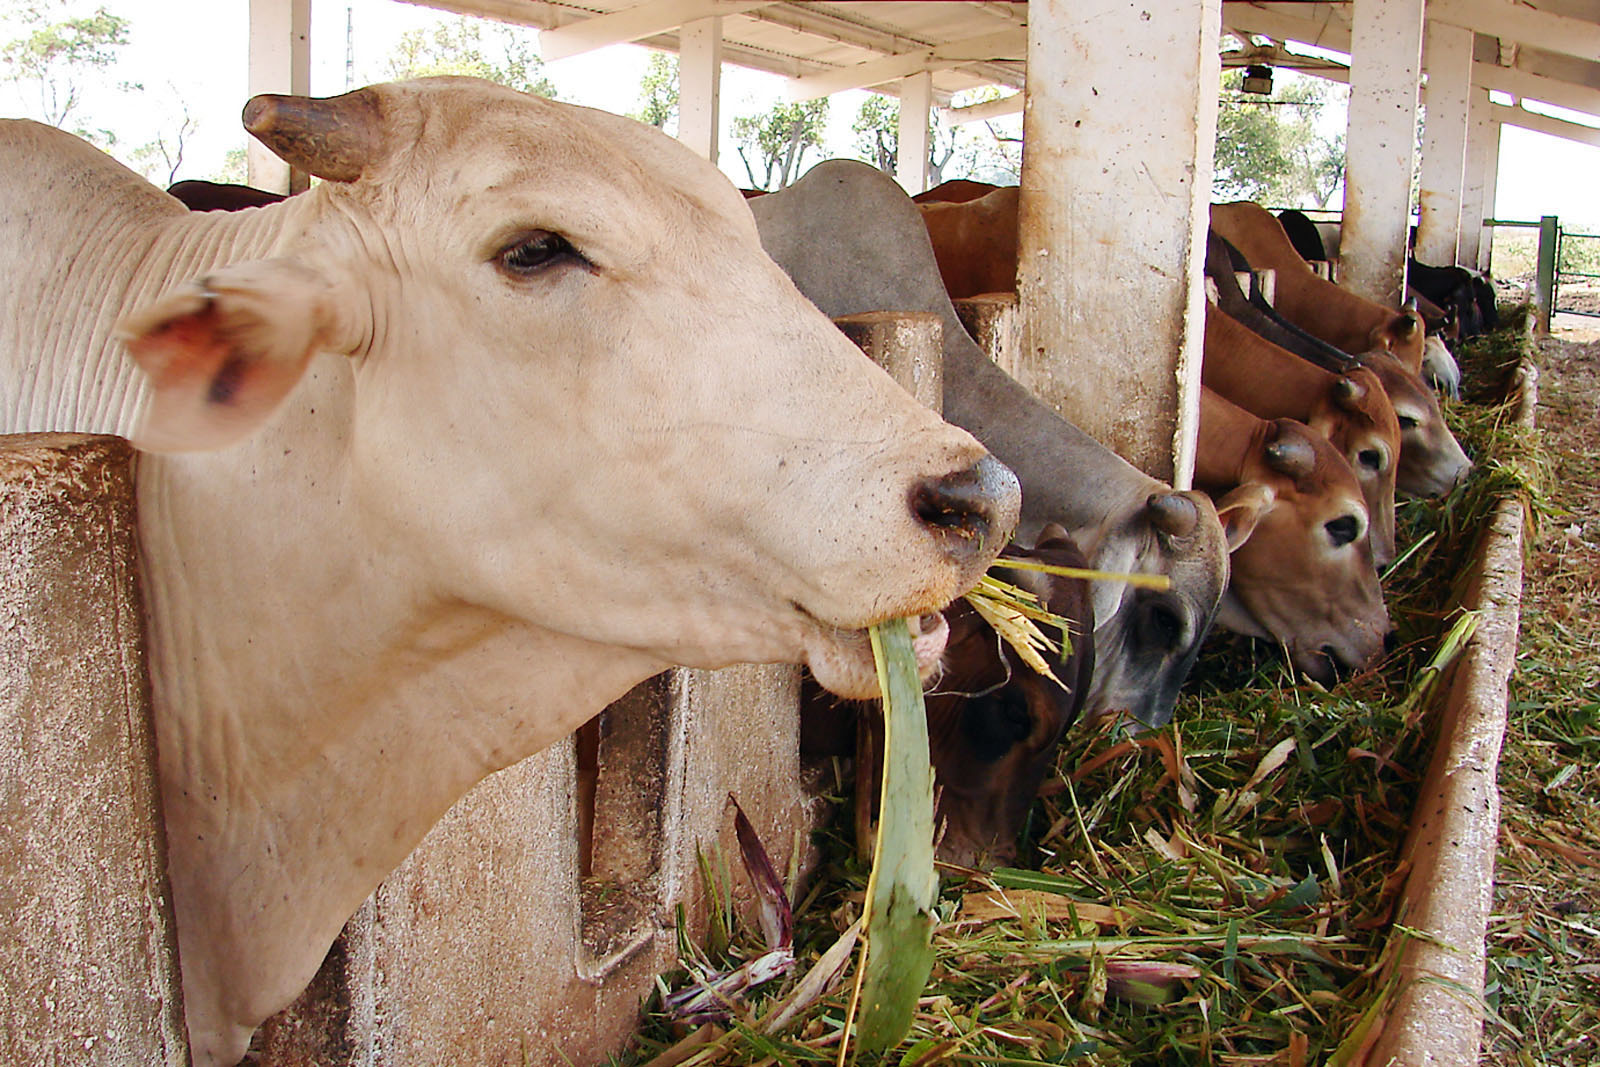 Sustainable livestock farming in Guáimaro: an opportunity for economic growth